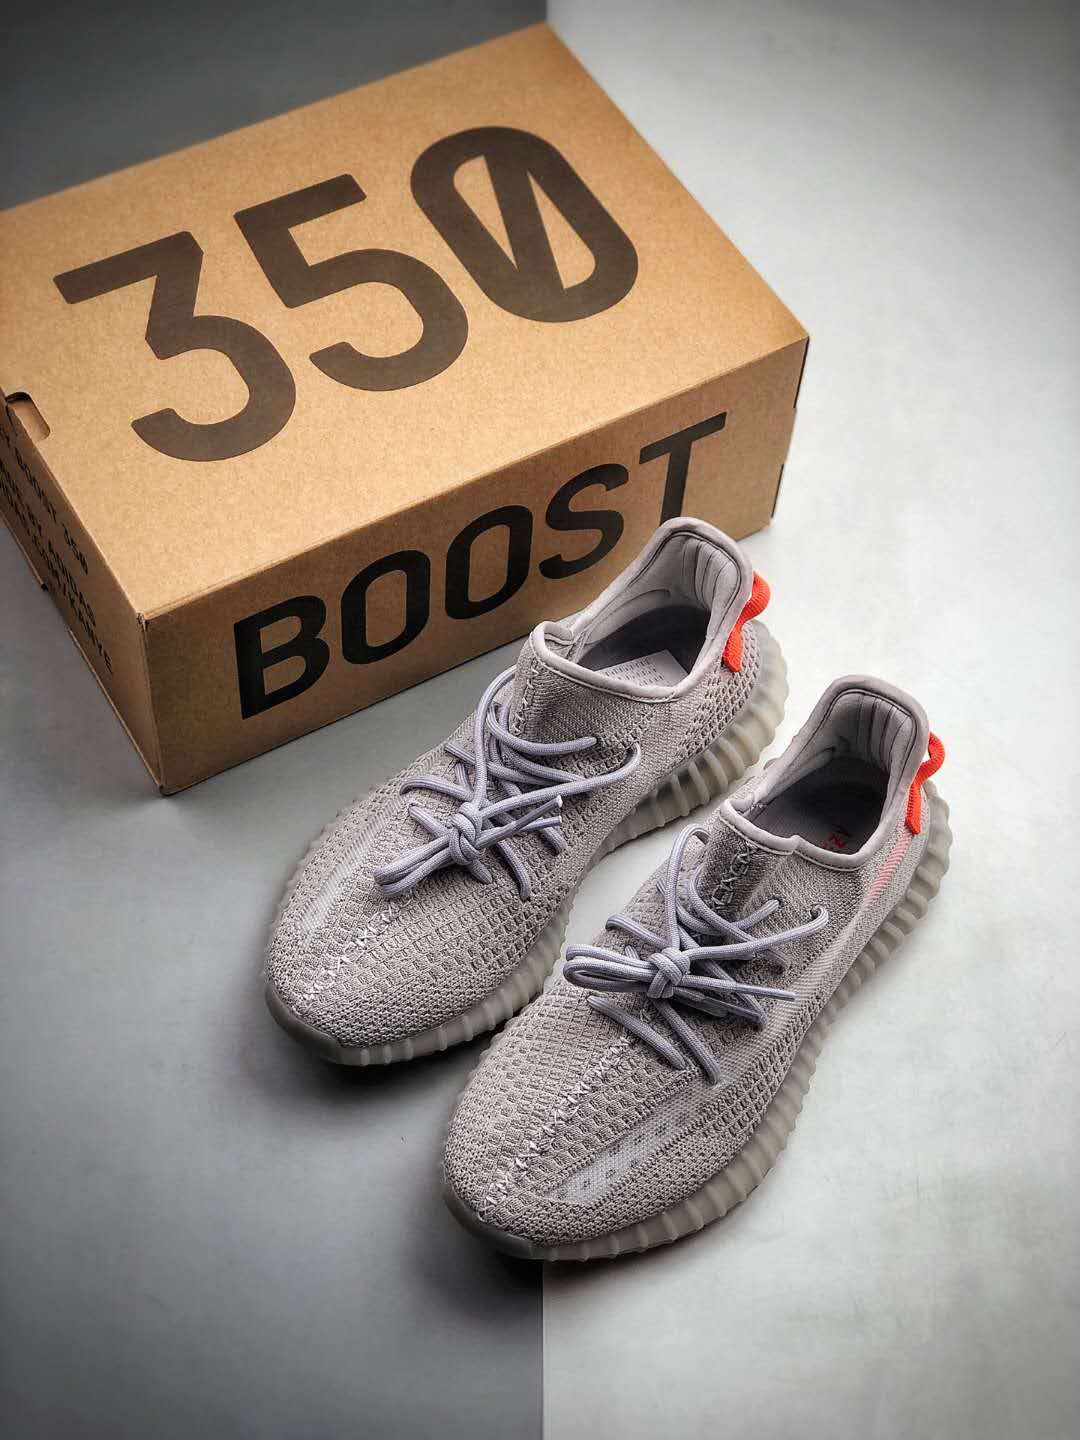 Adidas Yeezy Boost 350 V2 Tail Light FX9017 - Get the Latest Yeezy Style Now